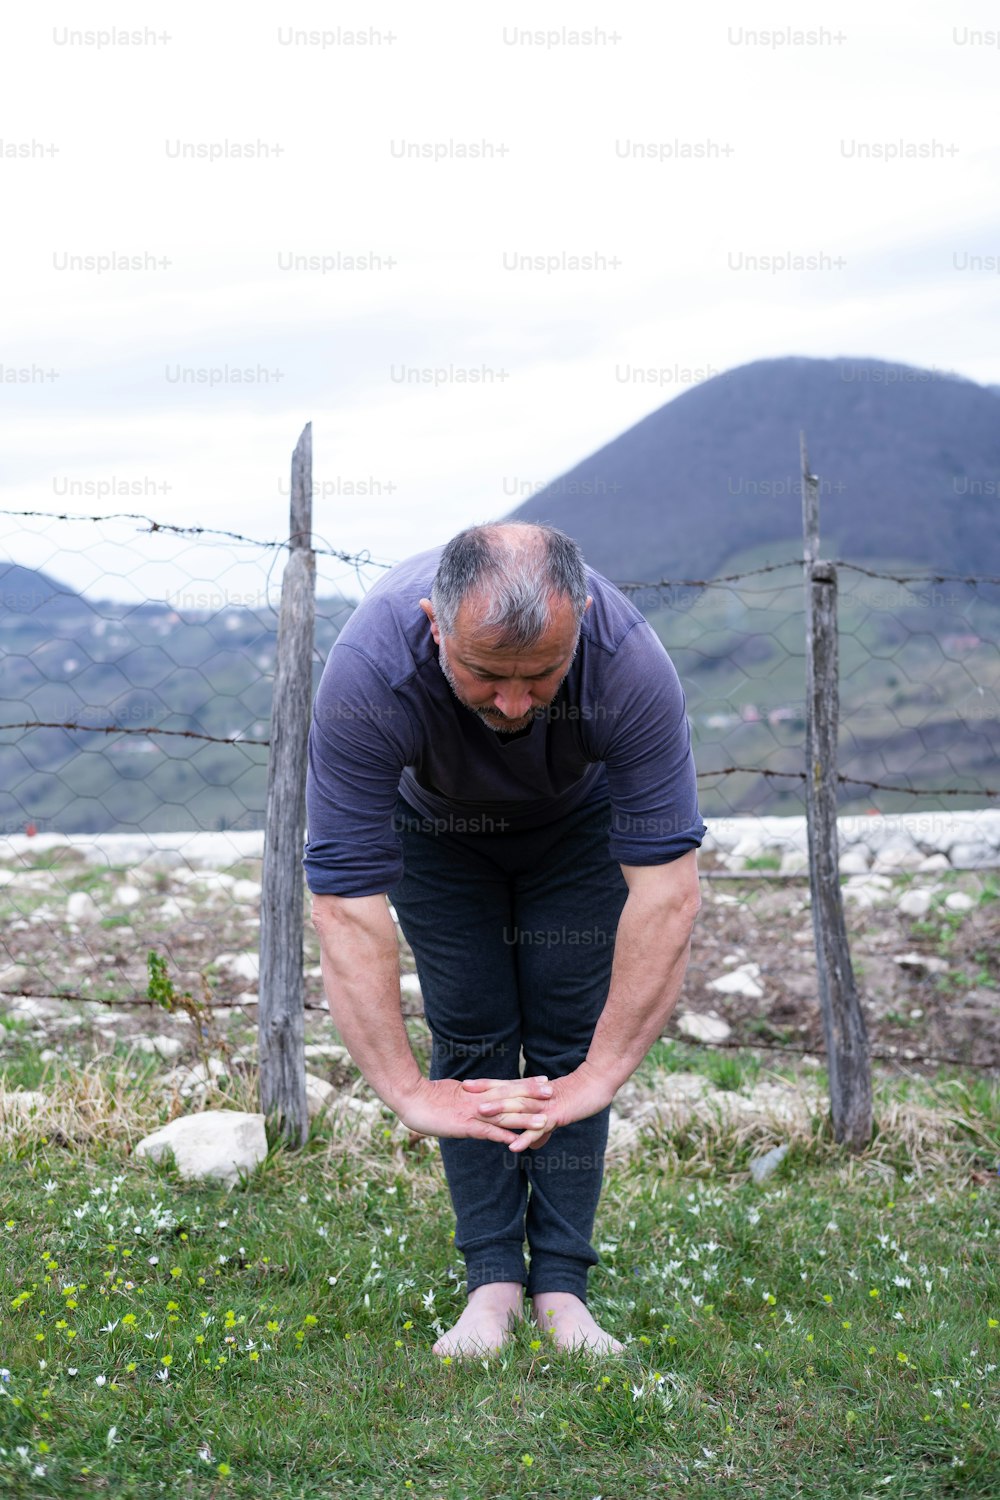 a man bending over in a field with mountains in the background